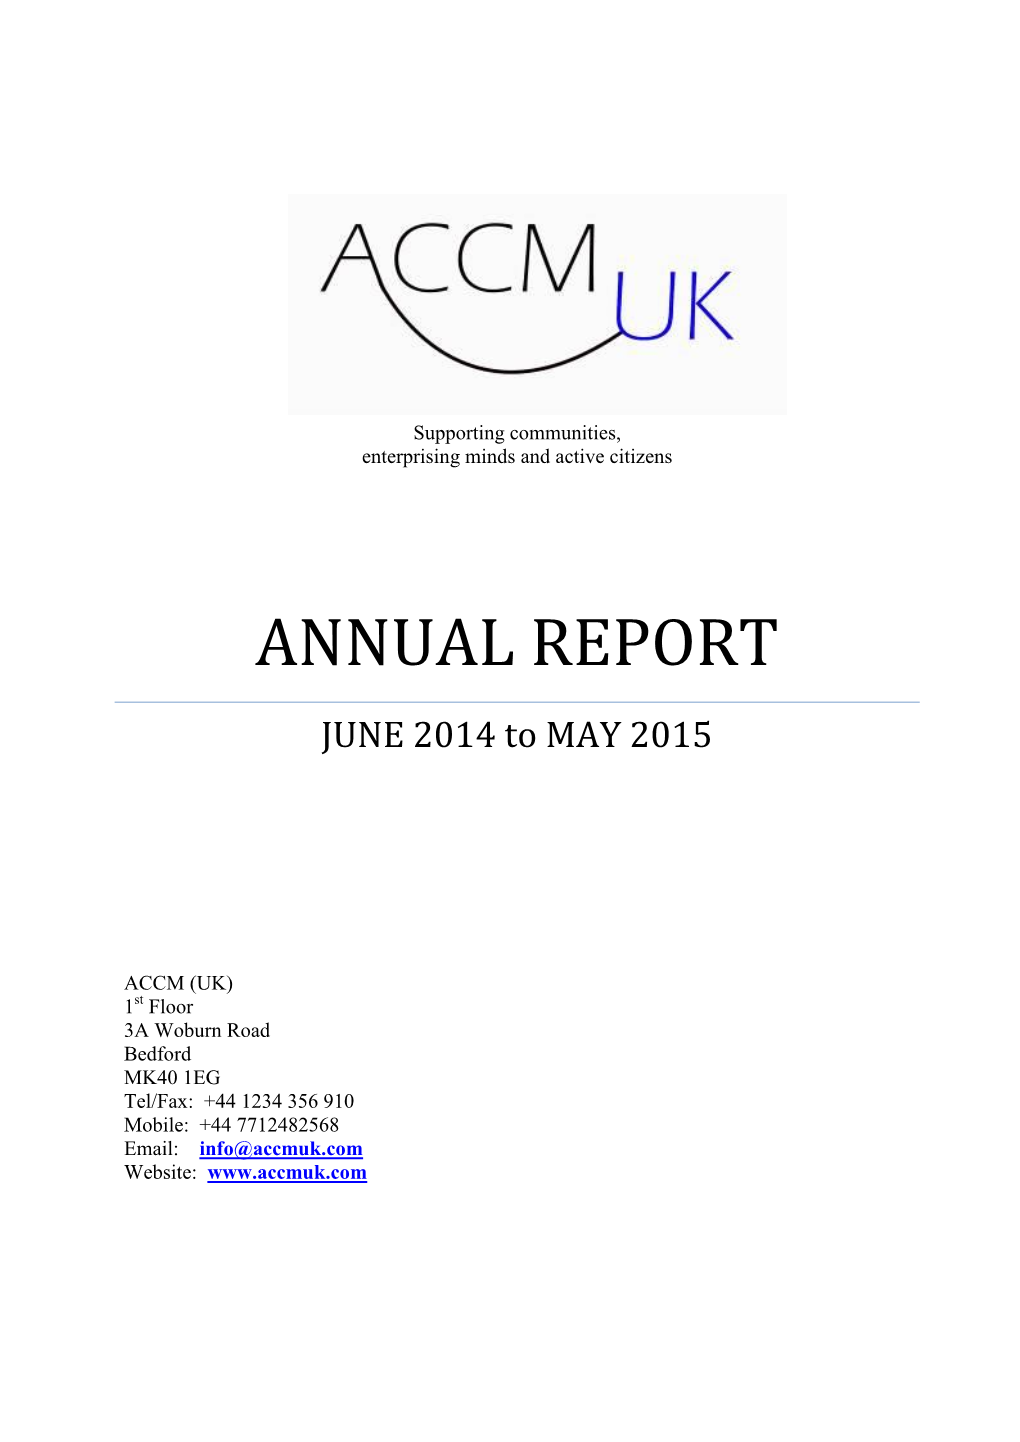 ANNUAL REPORT JUNE 2014 to MAY 2015